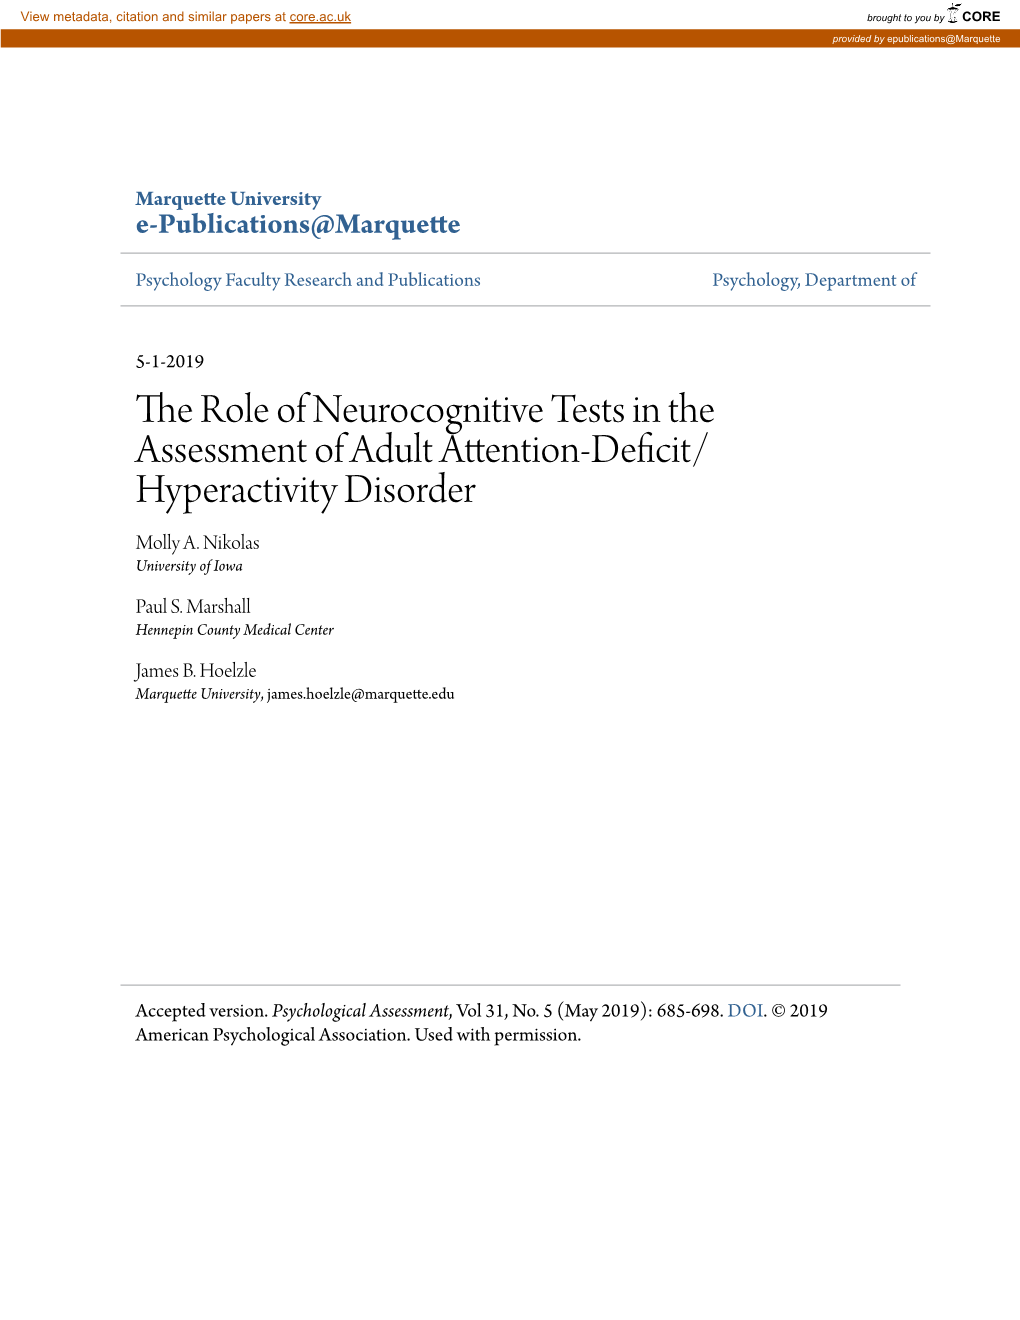 The Role of Neurocognitive Tests in the Assessment of Adult Attention-Deficit/Hyperactivity Disorder